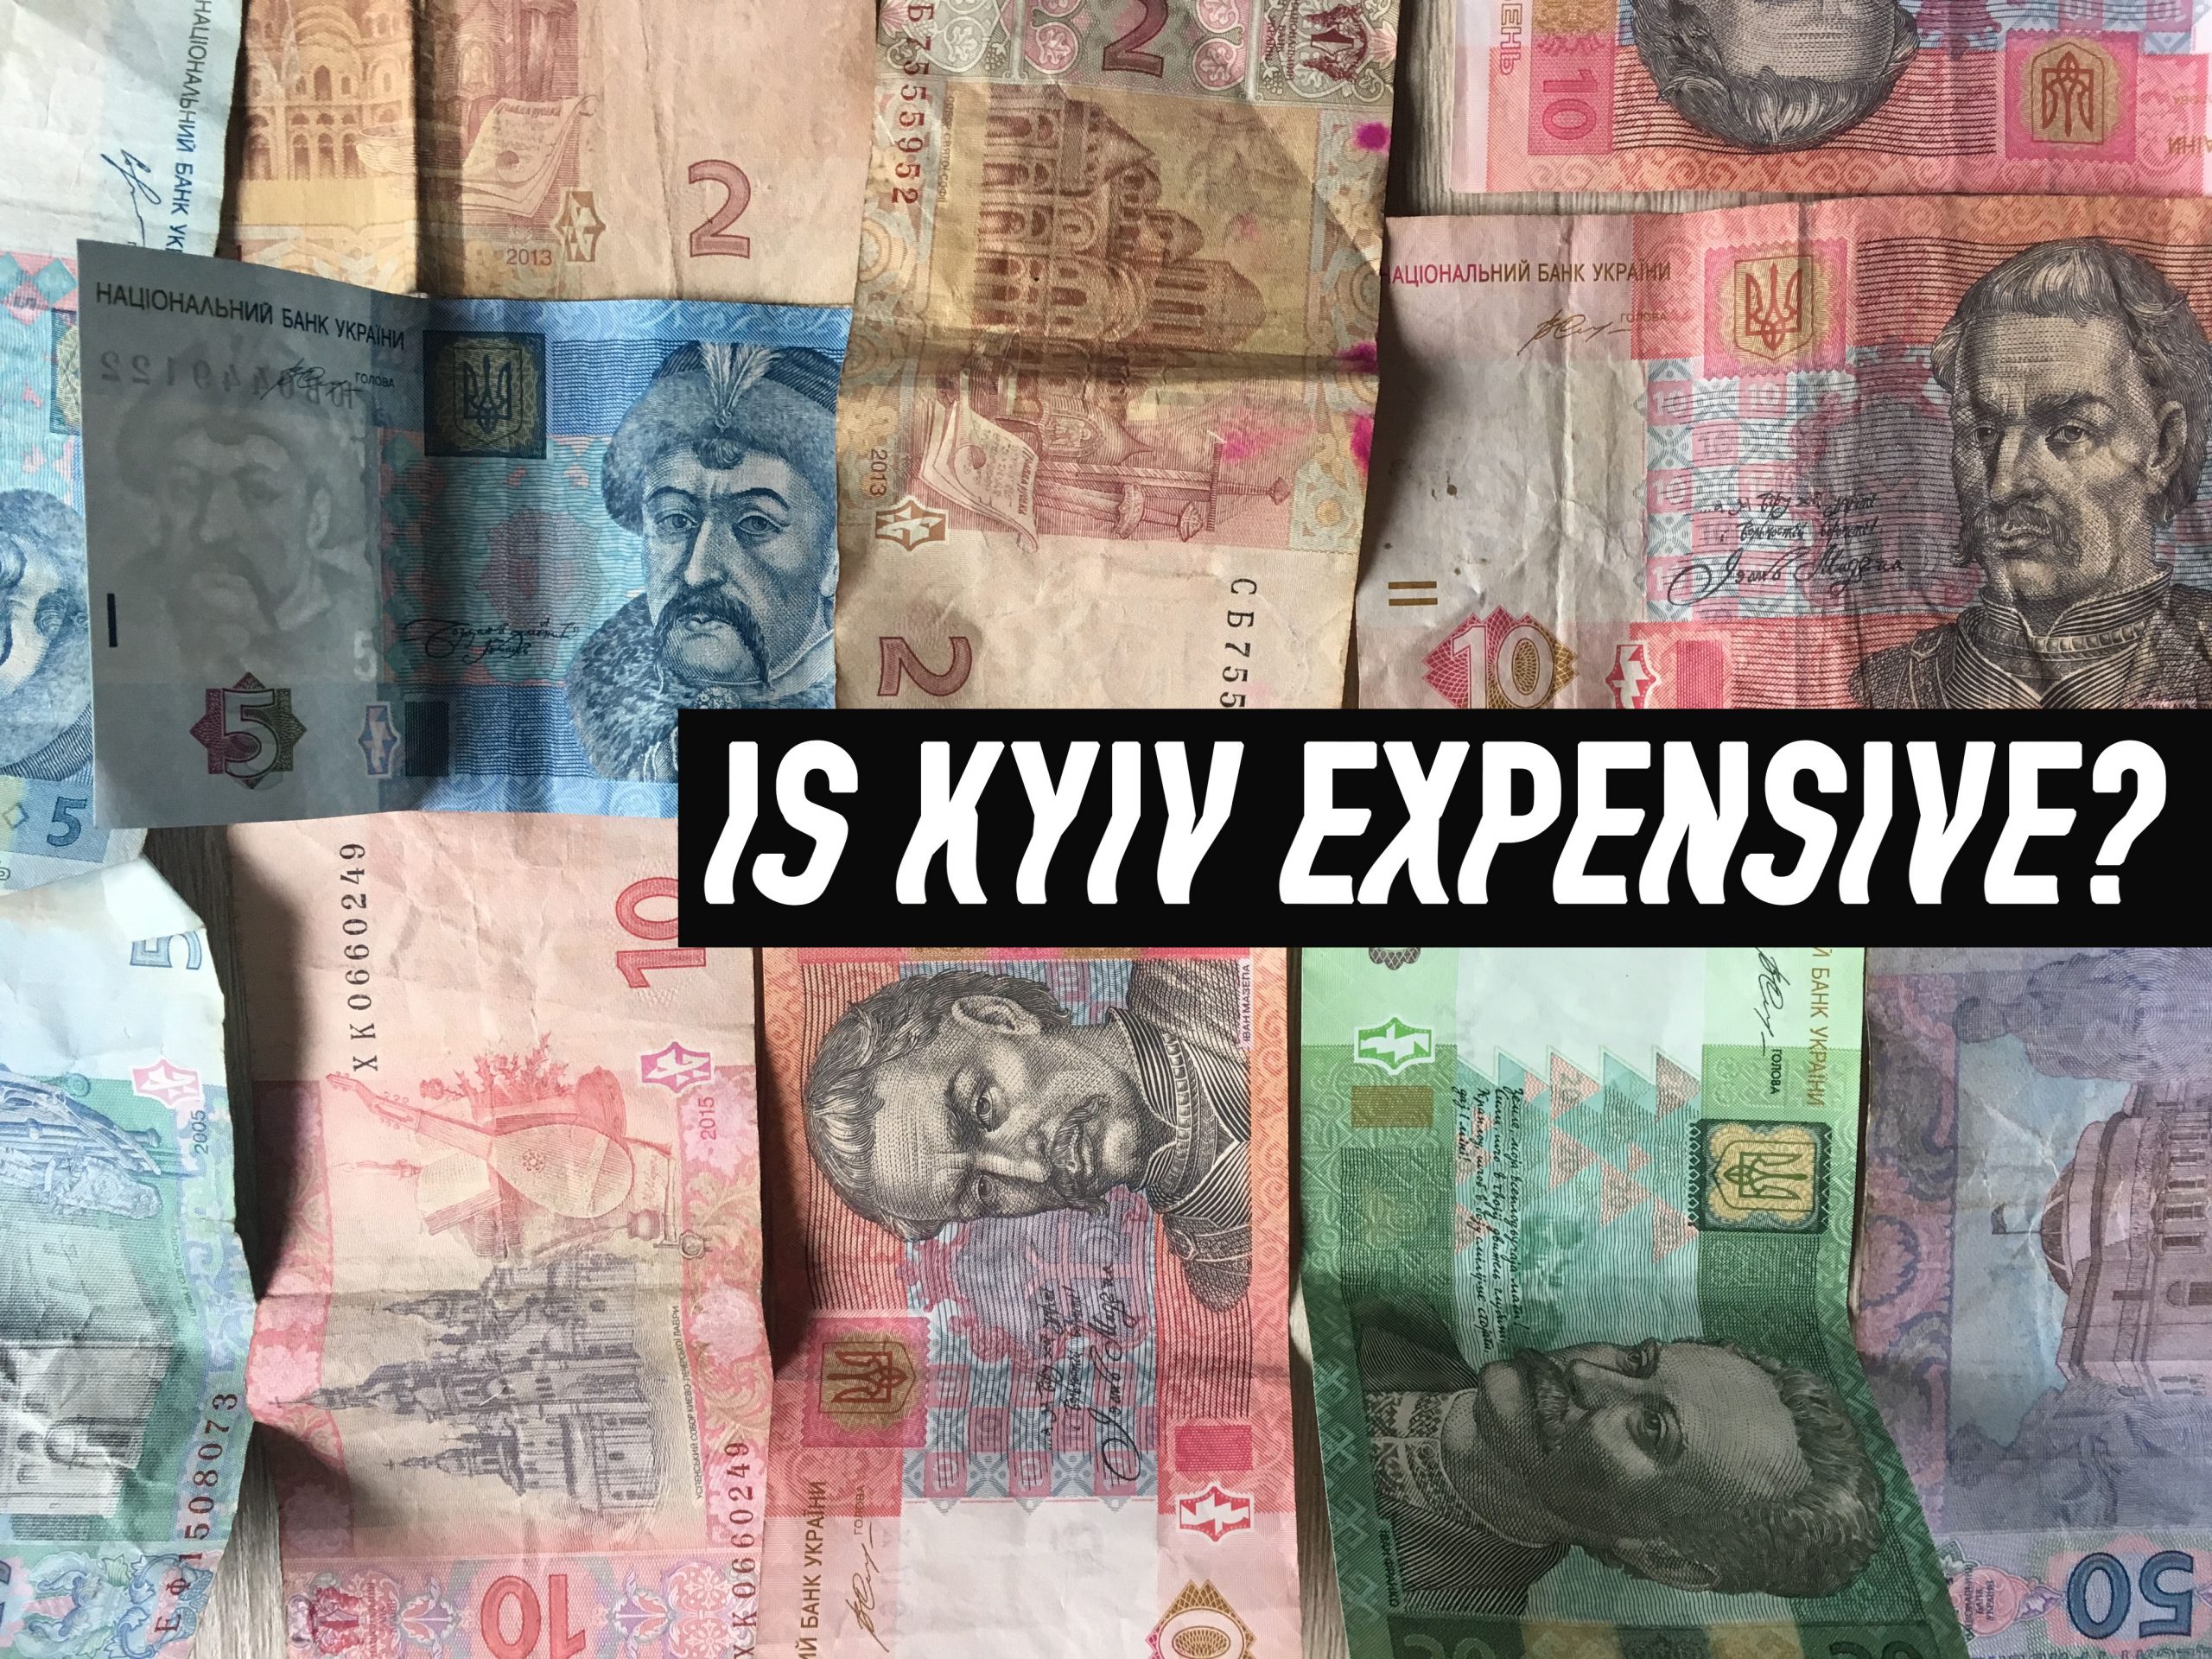 Cost of life and travel in Kyiv